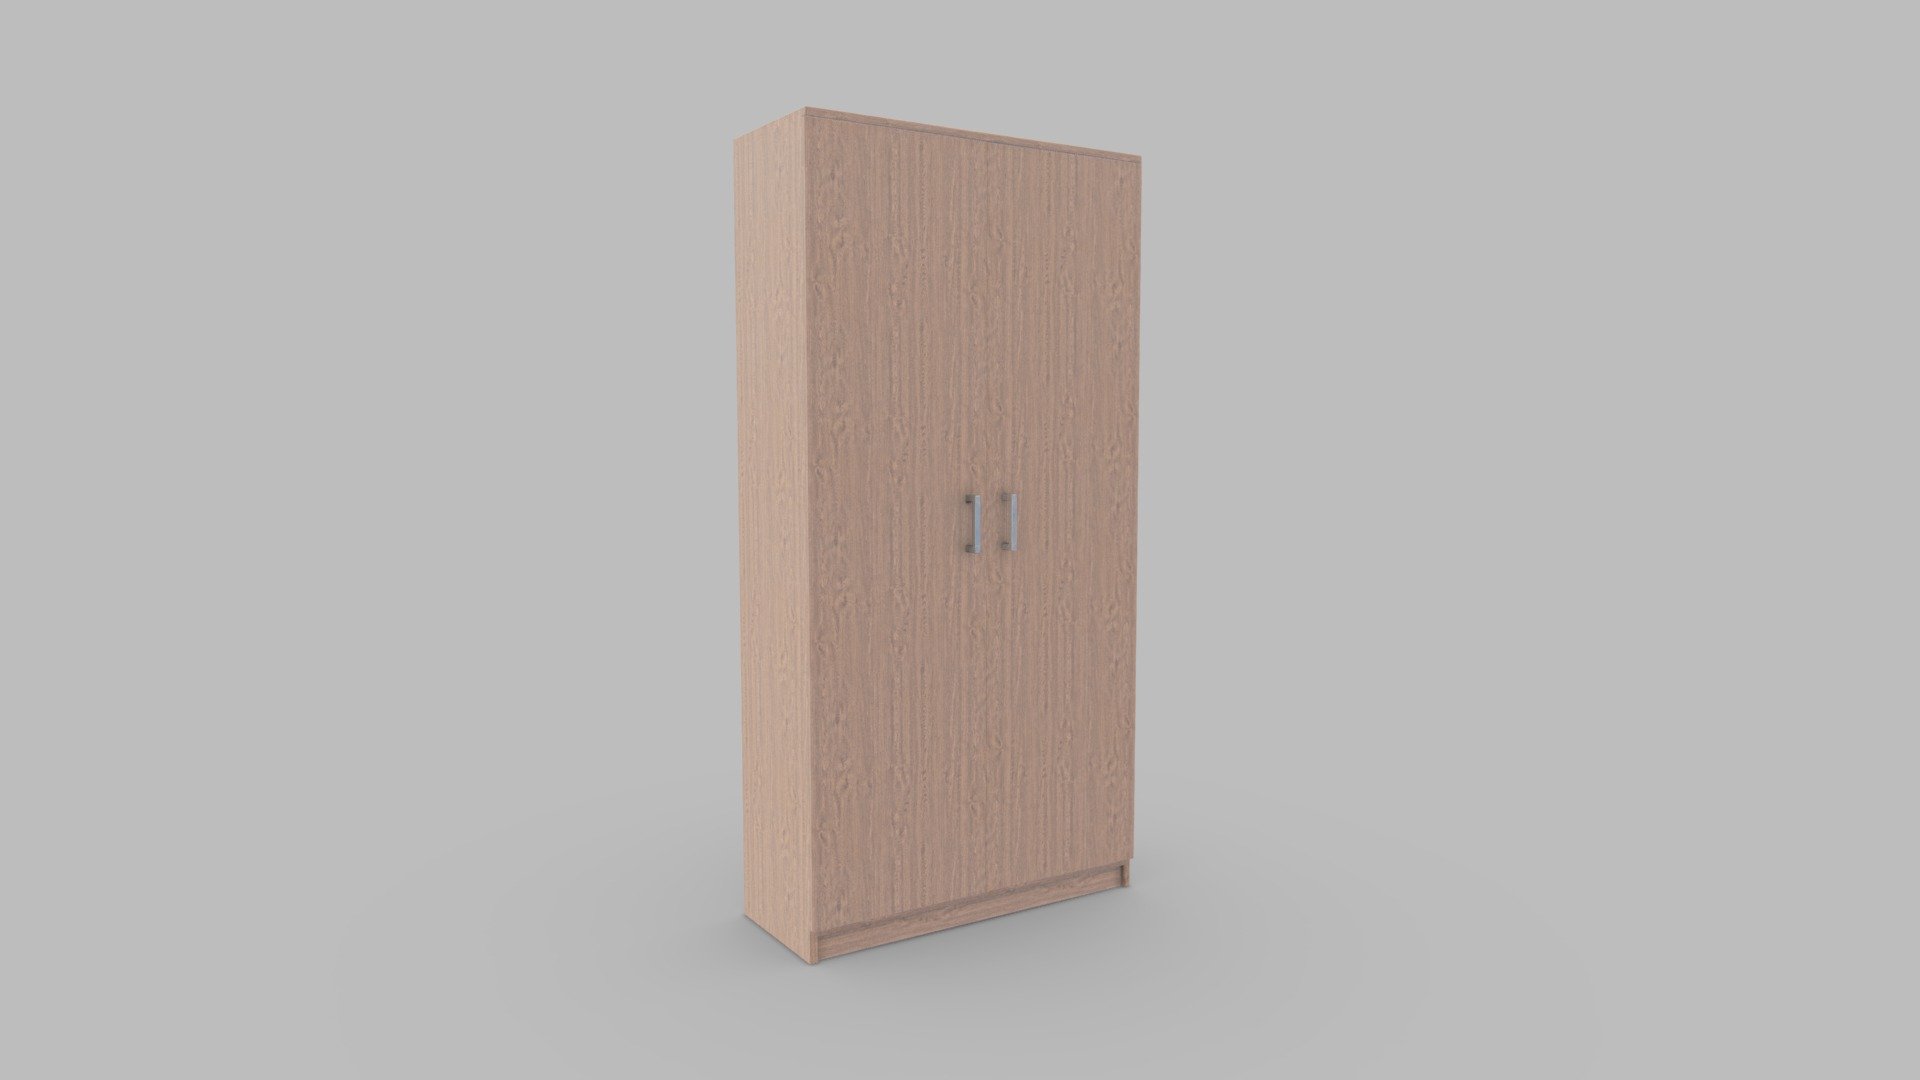 Office Cupboard model with PBR maps 4096x4096 such as: • BaseColor • Metallic • Roughness •  Ambient Occlusion • NormalDirectX •
Model in real scale (meters) 3d model